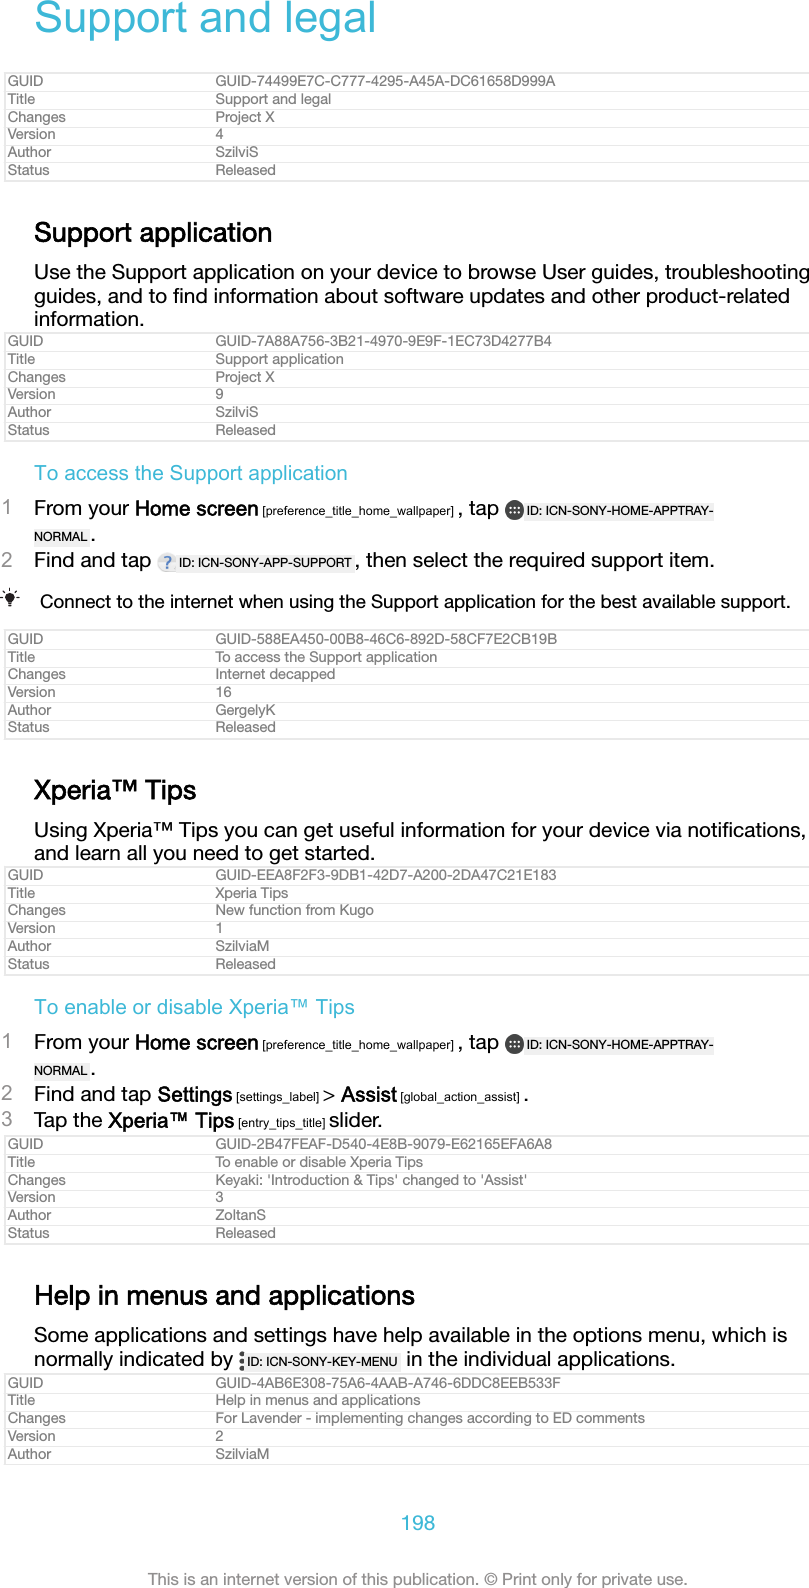 Support and legalGUID GUID-74499E7C-C777-4295-A45A-DC61658D999ATitle Support and legalChanges Project XVersion 4Author SzilviSStatus ReleasedSupport applicationUse the Support application on your device to browse User guides, troubleshootingguides, and to ﬁnd information about software updates and other product-relatedinformation.GUID GUID-7A88A756-3B21-4970-9E9F-1EC73D4277B4Title Support applicationChanges Project XVersion 9Author SzilviSStatus ReleasedTo access the Support application1From your Home screen [preference_title_home_wallpaper] , tap  ID: ICN-SONY-HOME-APPTRAY-NORMAL .2Find and tap  ID: ICN-SONY-APP-SUPPORT , then select the required support item.Connect to the internet when using the Support application for the best available support.GUID GUID-588EA450-00B8-46C6-892D-58CF7E2CB19BTitle To access the Support applicationChanges Internet decappedVersion 16Author GergelyKStatus ReleasedXperia™ TipsUsing Xperia™ Tips you can get useful information for your device via notiﬁcations,and learn all you need to get started.GUID GUID-EEA8F2F3-9DB1-42D7-A200-2DA47C21E183Title Xperia TipsChanges New function from KugoVersion 1Author SzilviaMStatus ReleasedTo enable or disable Xperia™ Tips1From your Home screen [preference_title_home_wallpaper] , tap  ID: ICN-SONY-HOME-APPTRAY-NORMAL .2Find and tap Settings [settings_label] &gt; Assist [global_action_assist] .3Tap the Xperia™ Tips [entry_tips_title] slider.GUID GUID-2B47FEAF-D540-4E8B-9079-E62165EFA6A8Title To enable or disable Xperia TipsChanges Keyaki: &apos;Introduction &amp; Tips&apos; changed to &apos;Assist&apos;Version 3Author ZoltanSStatus ReleasedHelp in menus and applicationsSome applications and settings have help available in the options menu, which isnormally indicated by  ID: ICN-SONY-KEY-MENU  in the individual applications.GUID GUID-4AB6E308-75A6-4AAB-A746-6DDC8EEB533FTitle Help in menus and applicationsChanges For Lavender - implementing changes according to ED commentsVersion 2Author SzilviaM198This is an internet version of this publication. © Print only for private use.